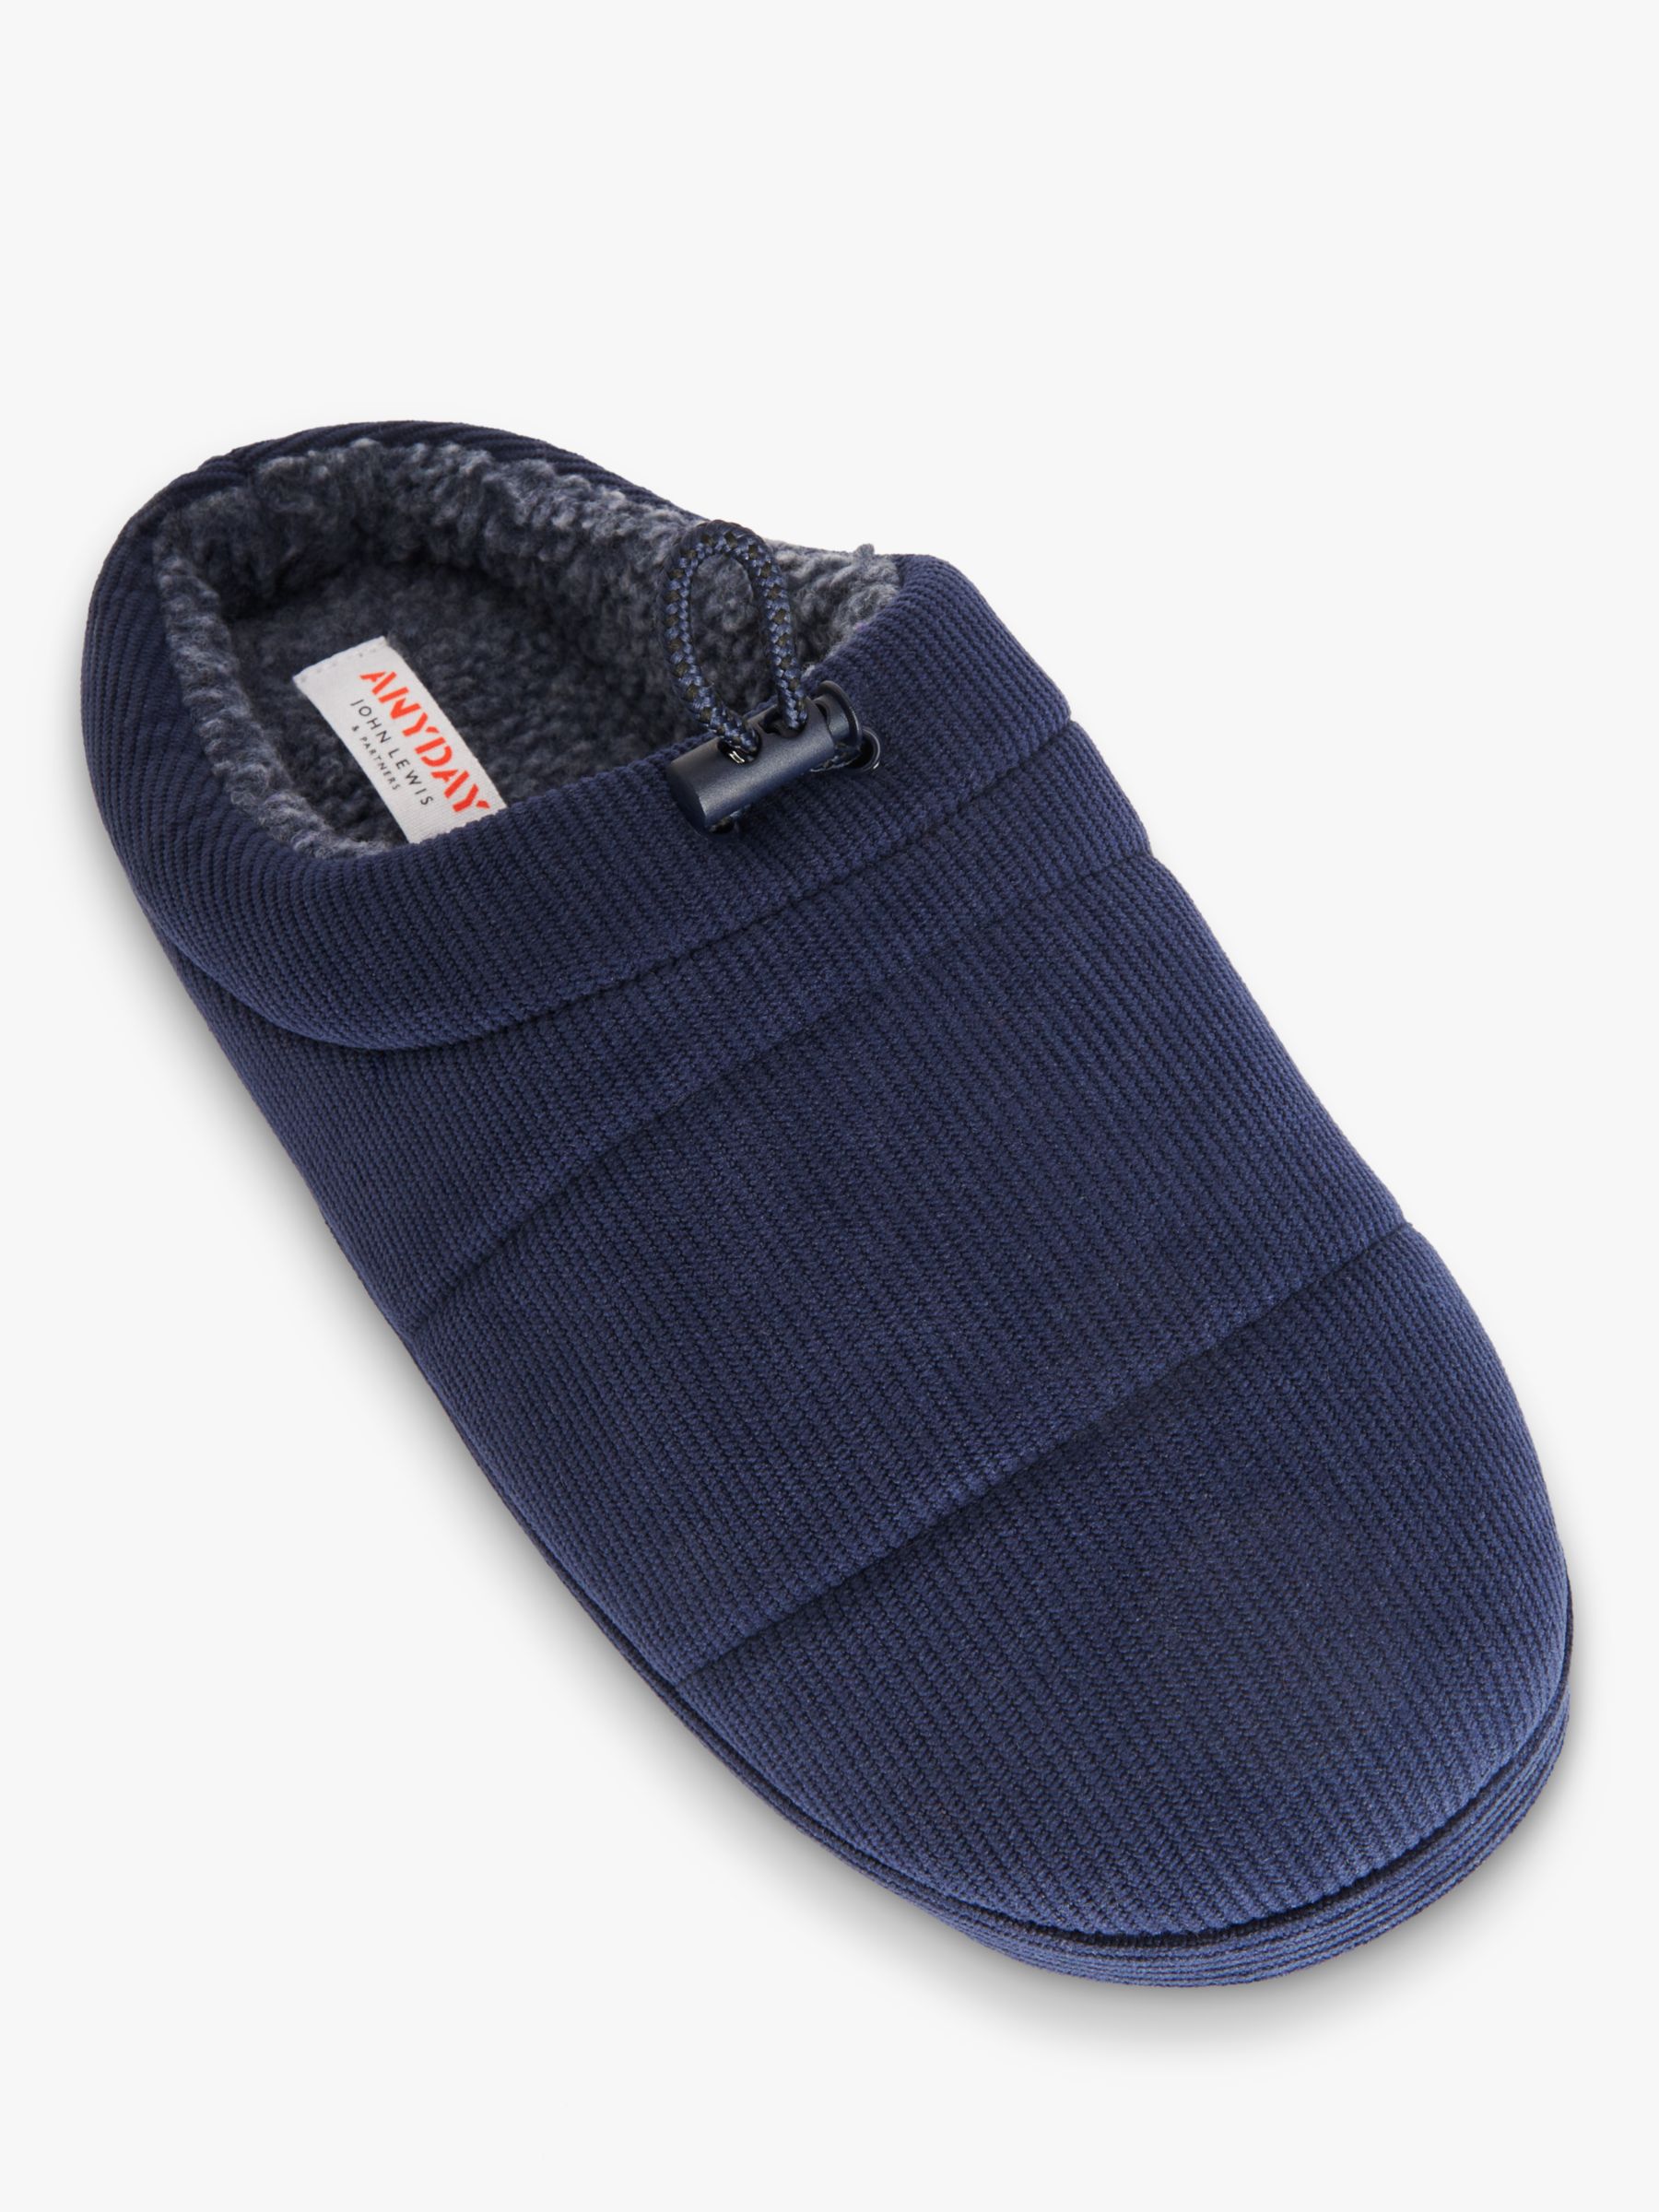 John Lewis ANYDAY Cord Mule Slippers, Navy, M